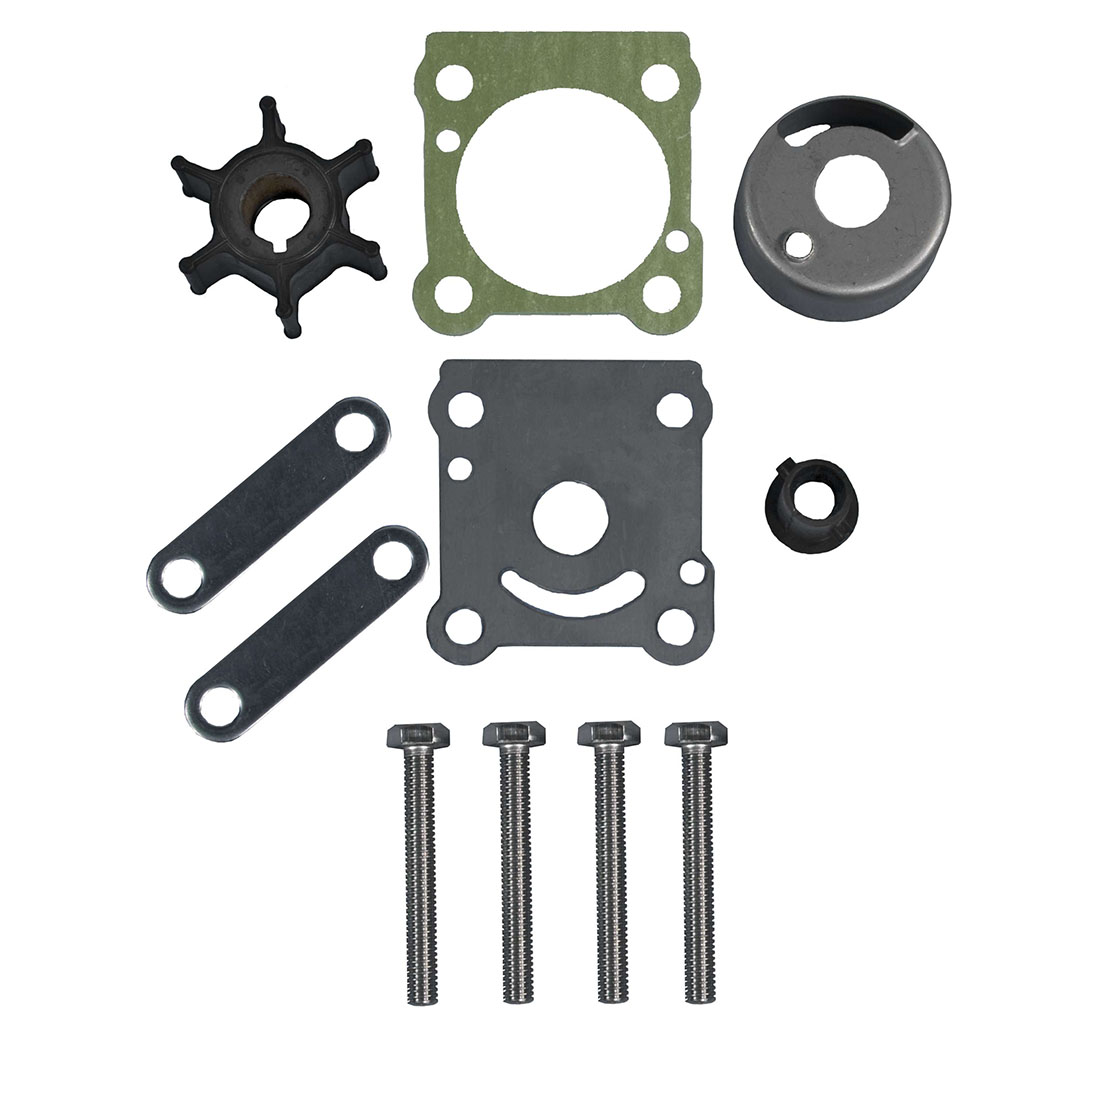 Water Pump Service Kit for Mercury Replaces: 11656T